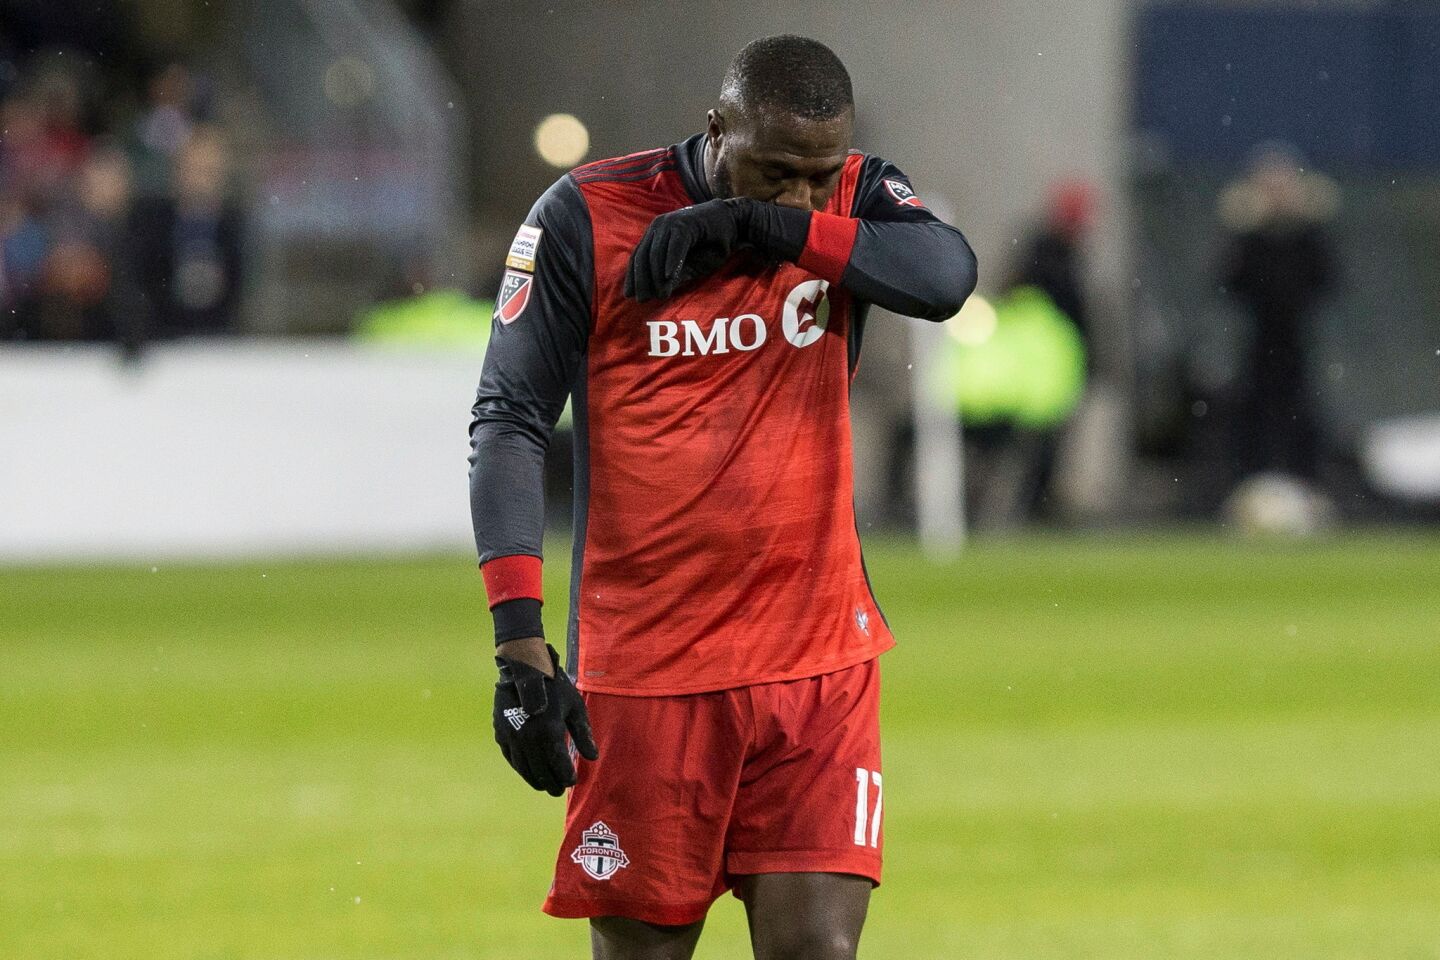 Toronto FC's Jozy Altidore reacts during the first half against Guadalajara in the first leg of the CONCACAF Champions League soccer final, Tuesday, April 17, 2018, in Toronto. (Chris Young/The Canadian Press via AP)